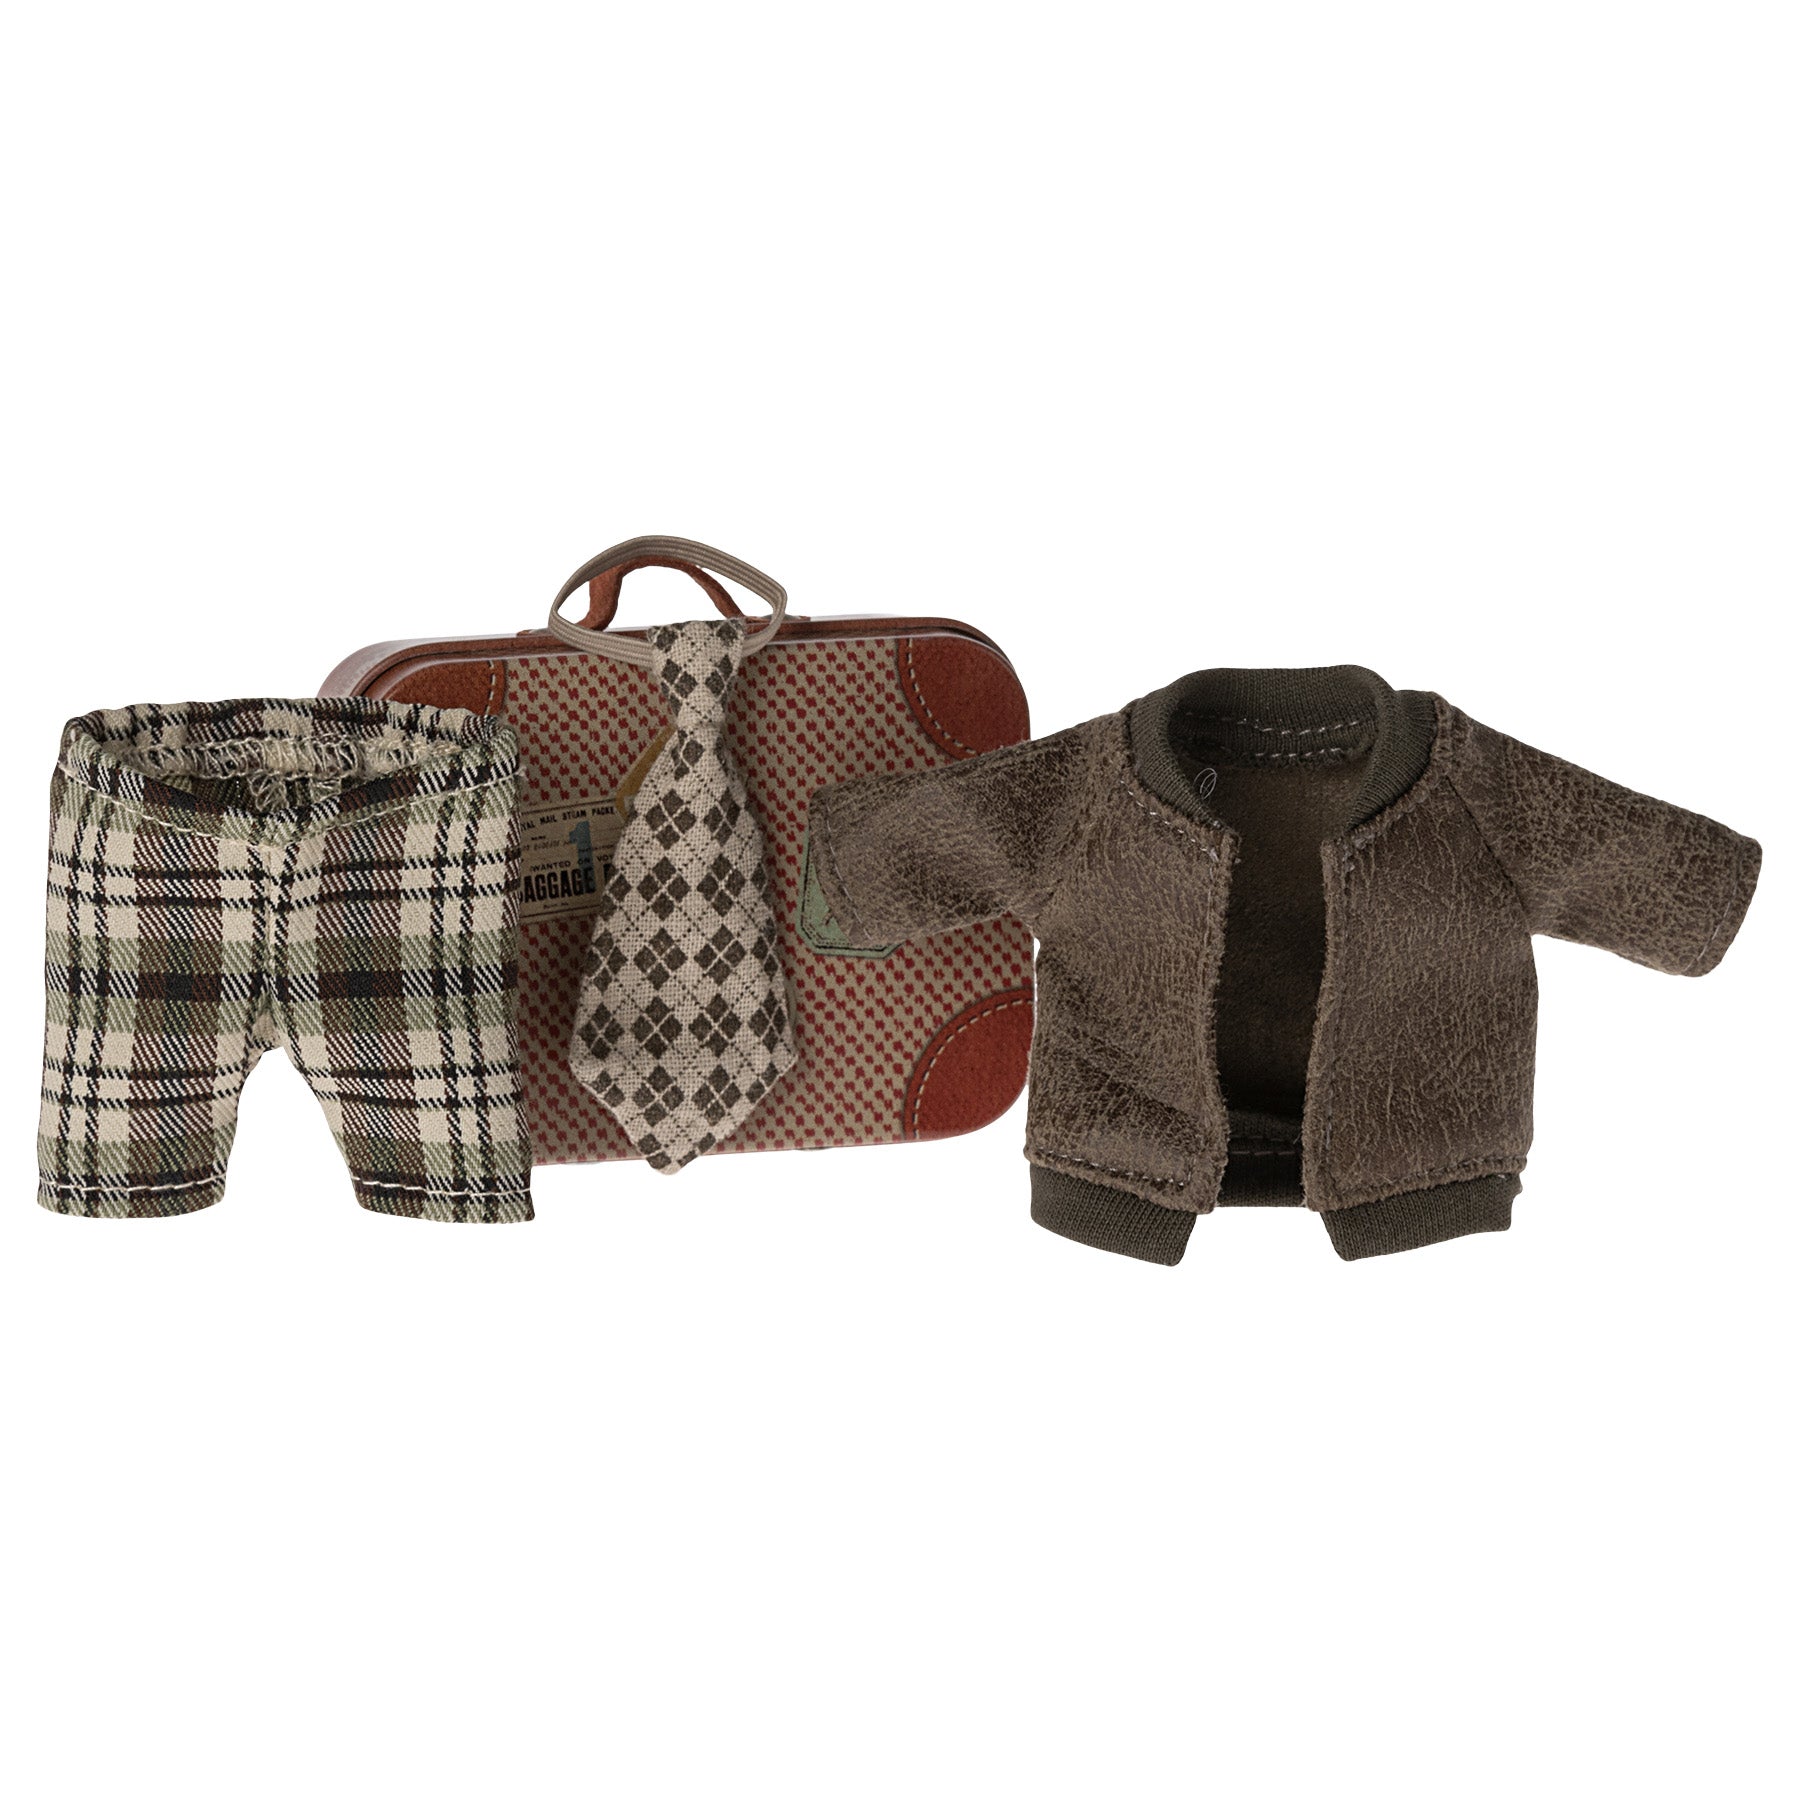 Maileg Jacket, Pants and Tie in a Suitcase, Grandpa Mouse